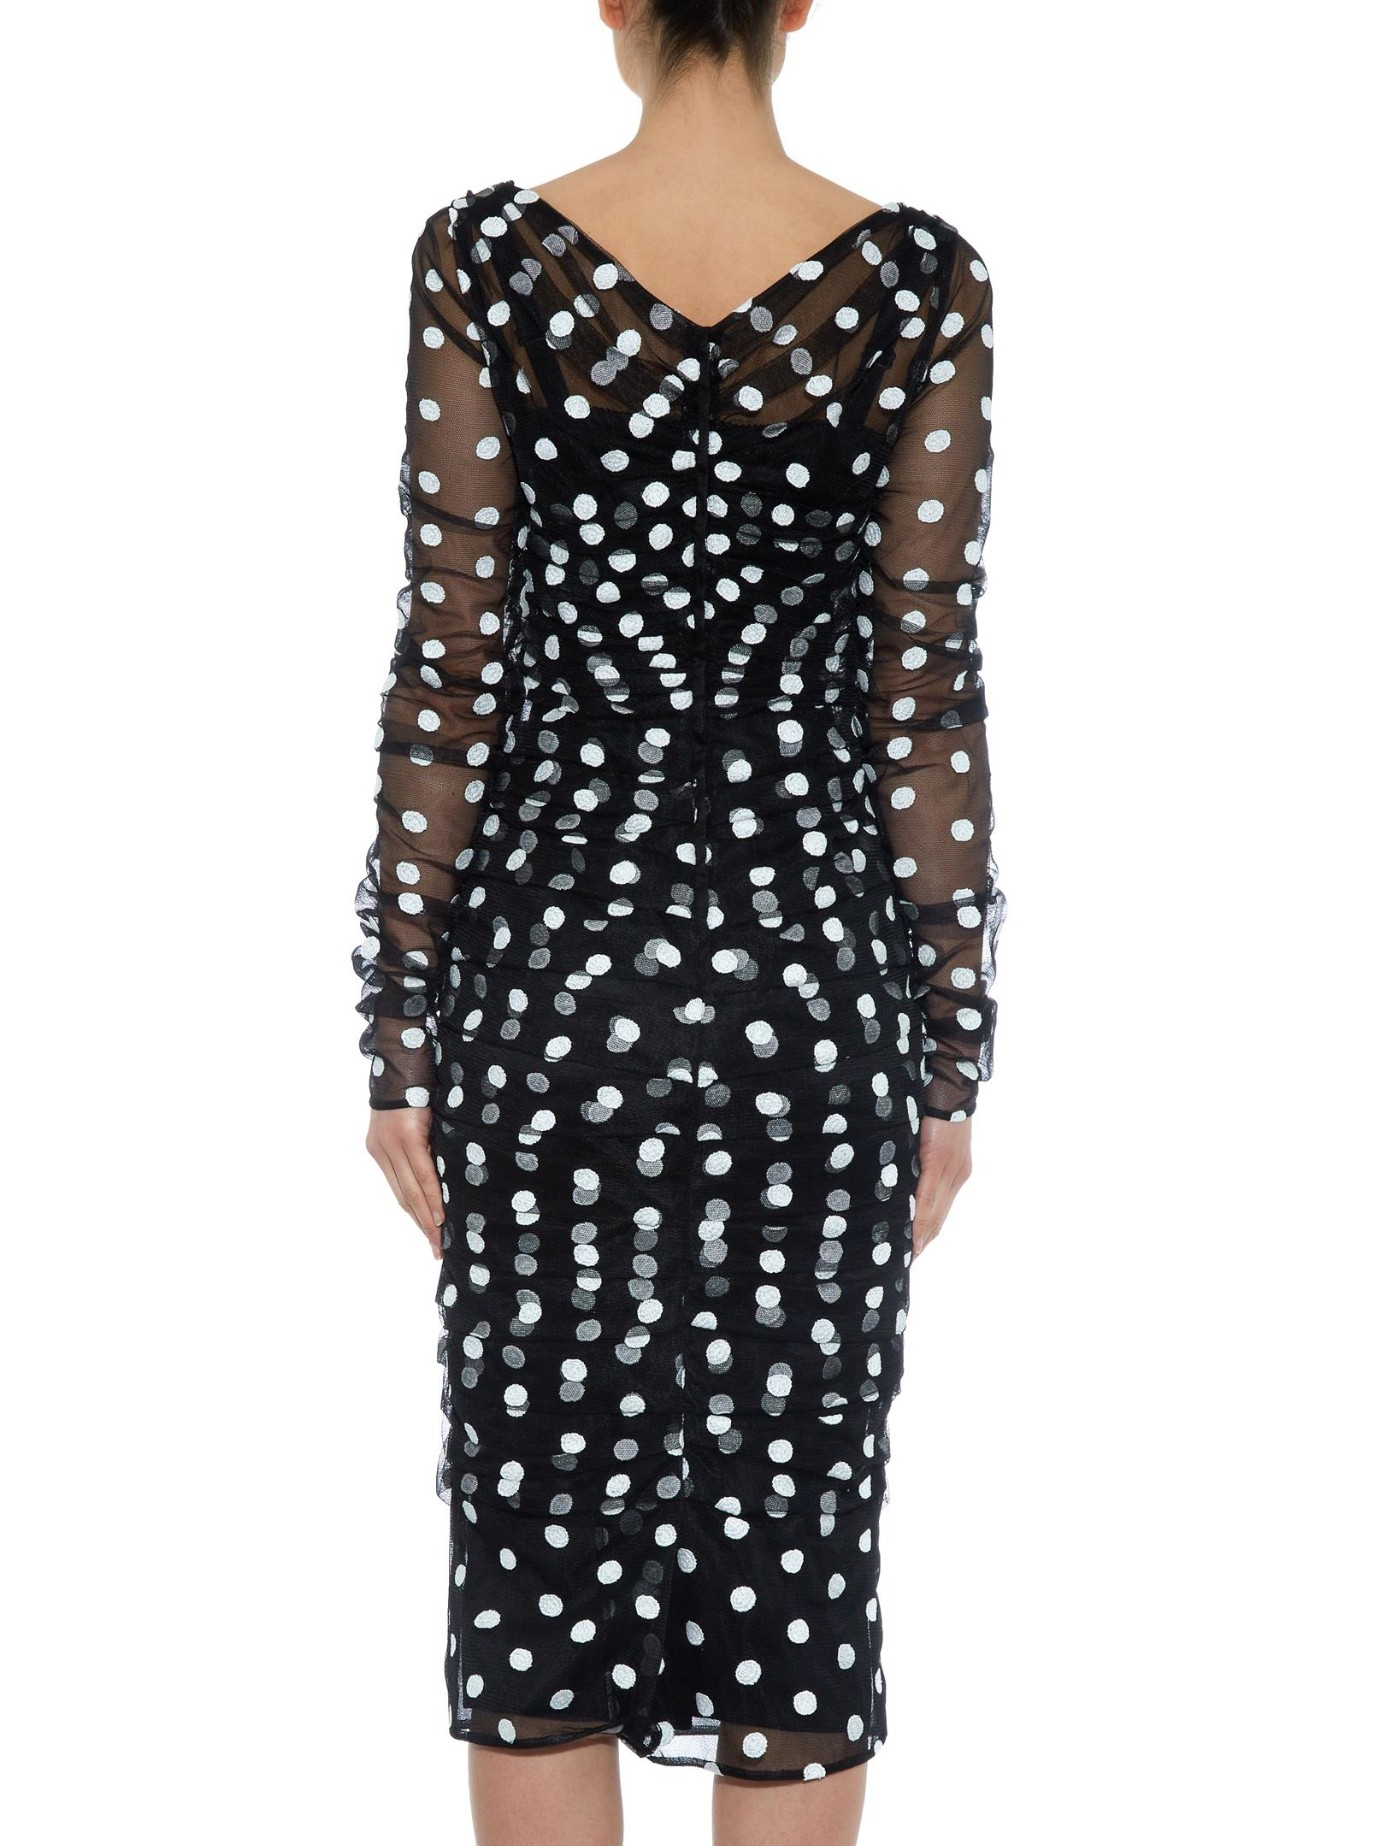 Dolce & gabbana Polka-Dot Embroidered Tulle Dress in Black | Lyst